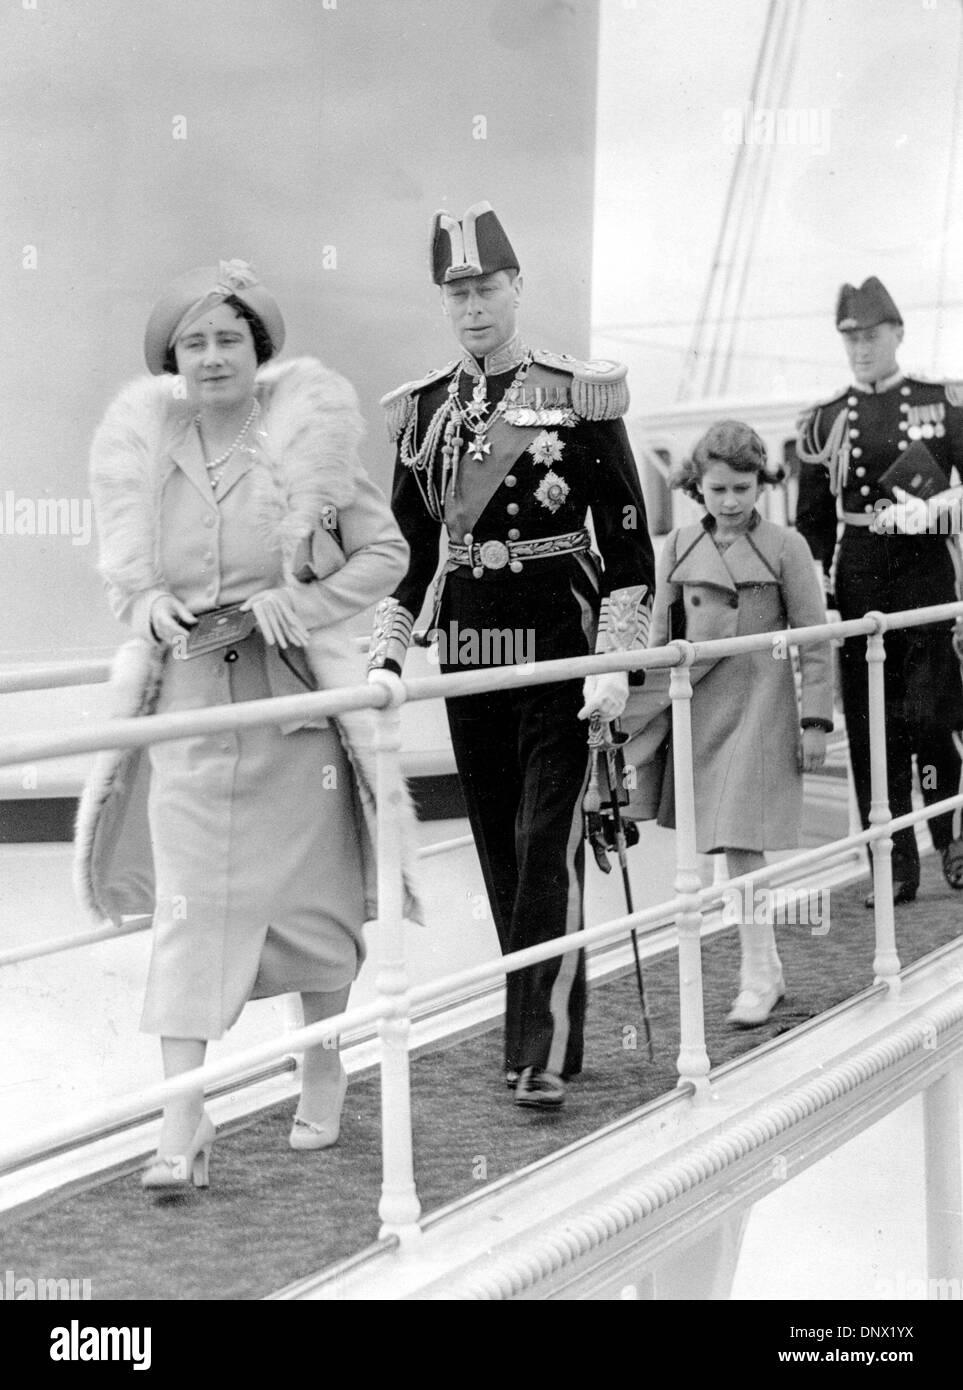 May 20, 1937 - Portsmouth, England, U.K. - GEORGE VI Became King unexpectedly following the abdication of his brother, King Edward VIII, in 1936. AÊconscientious and dedicated man, he worked hard to adapt to the role into which he was suddenly thrown. He had married Lady ELIZABETH BOWES-LYON in 1923. King George VI paid State Visits to France in 1938, and to Canada and the United S Stock Photo